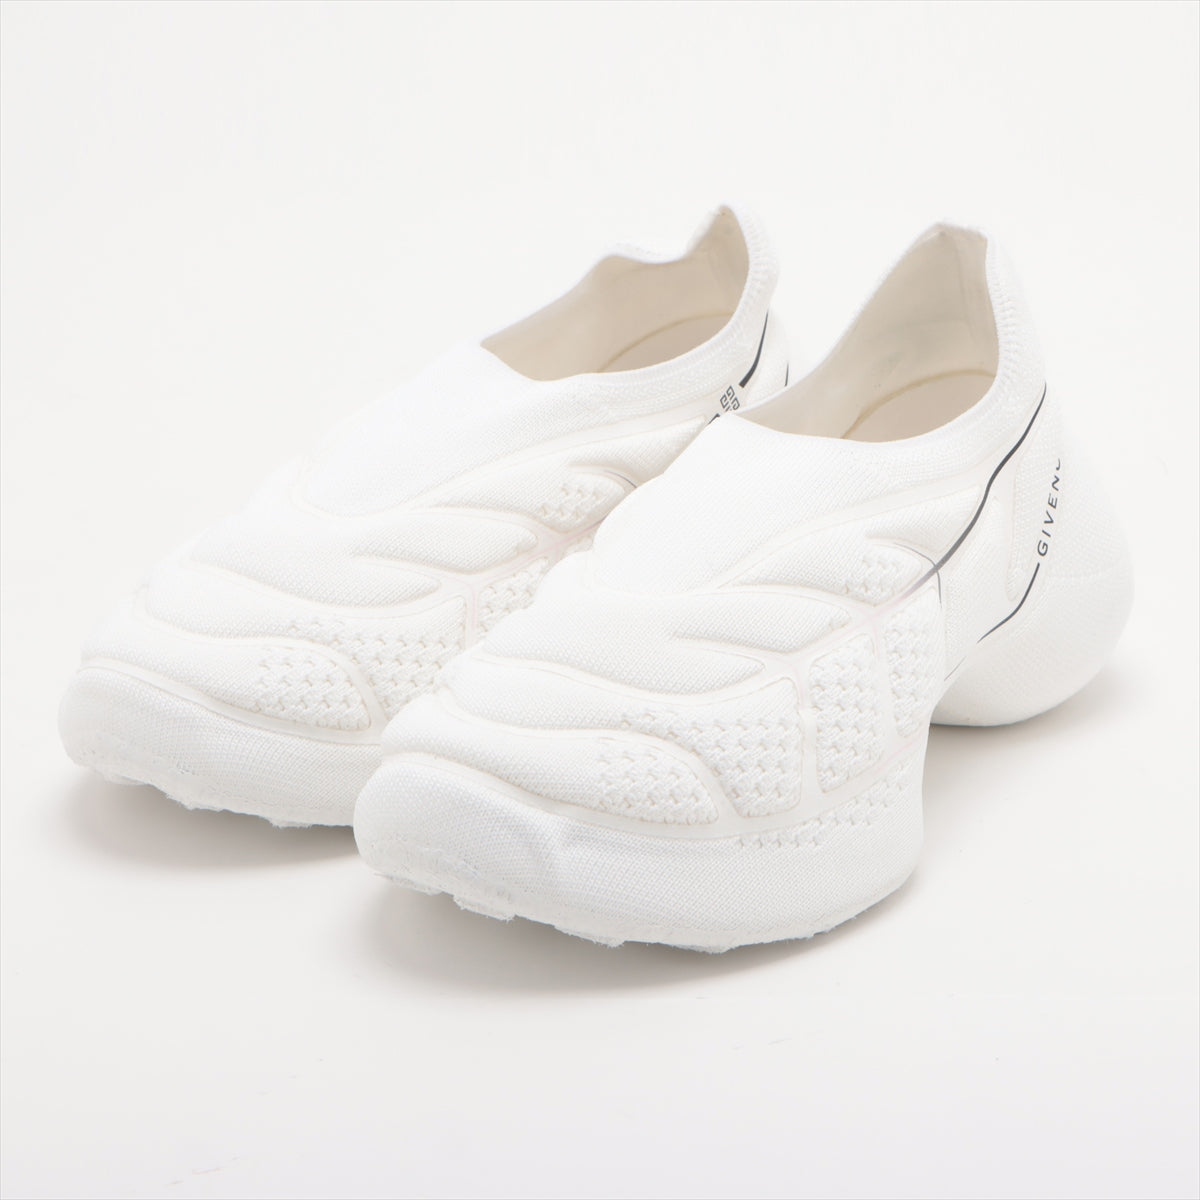 Givenchy Mesh Slip-on 37 Ladies' White BE002WE1JK TK-360 Mesh Low-top Sneakers There is a box